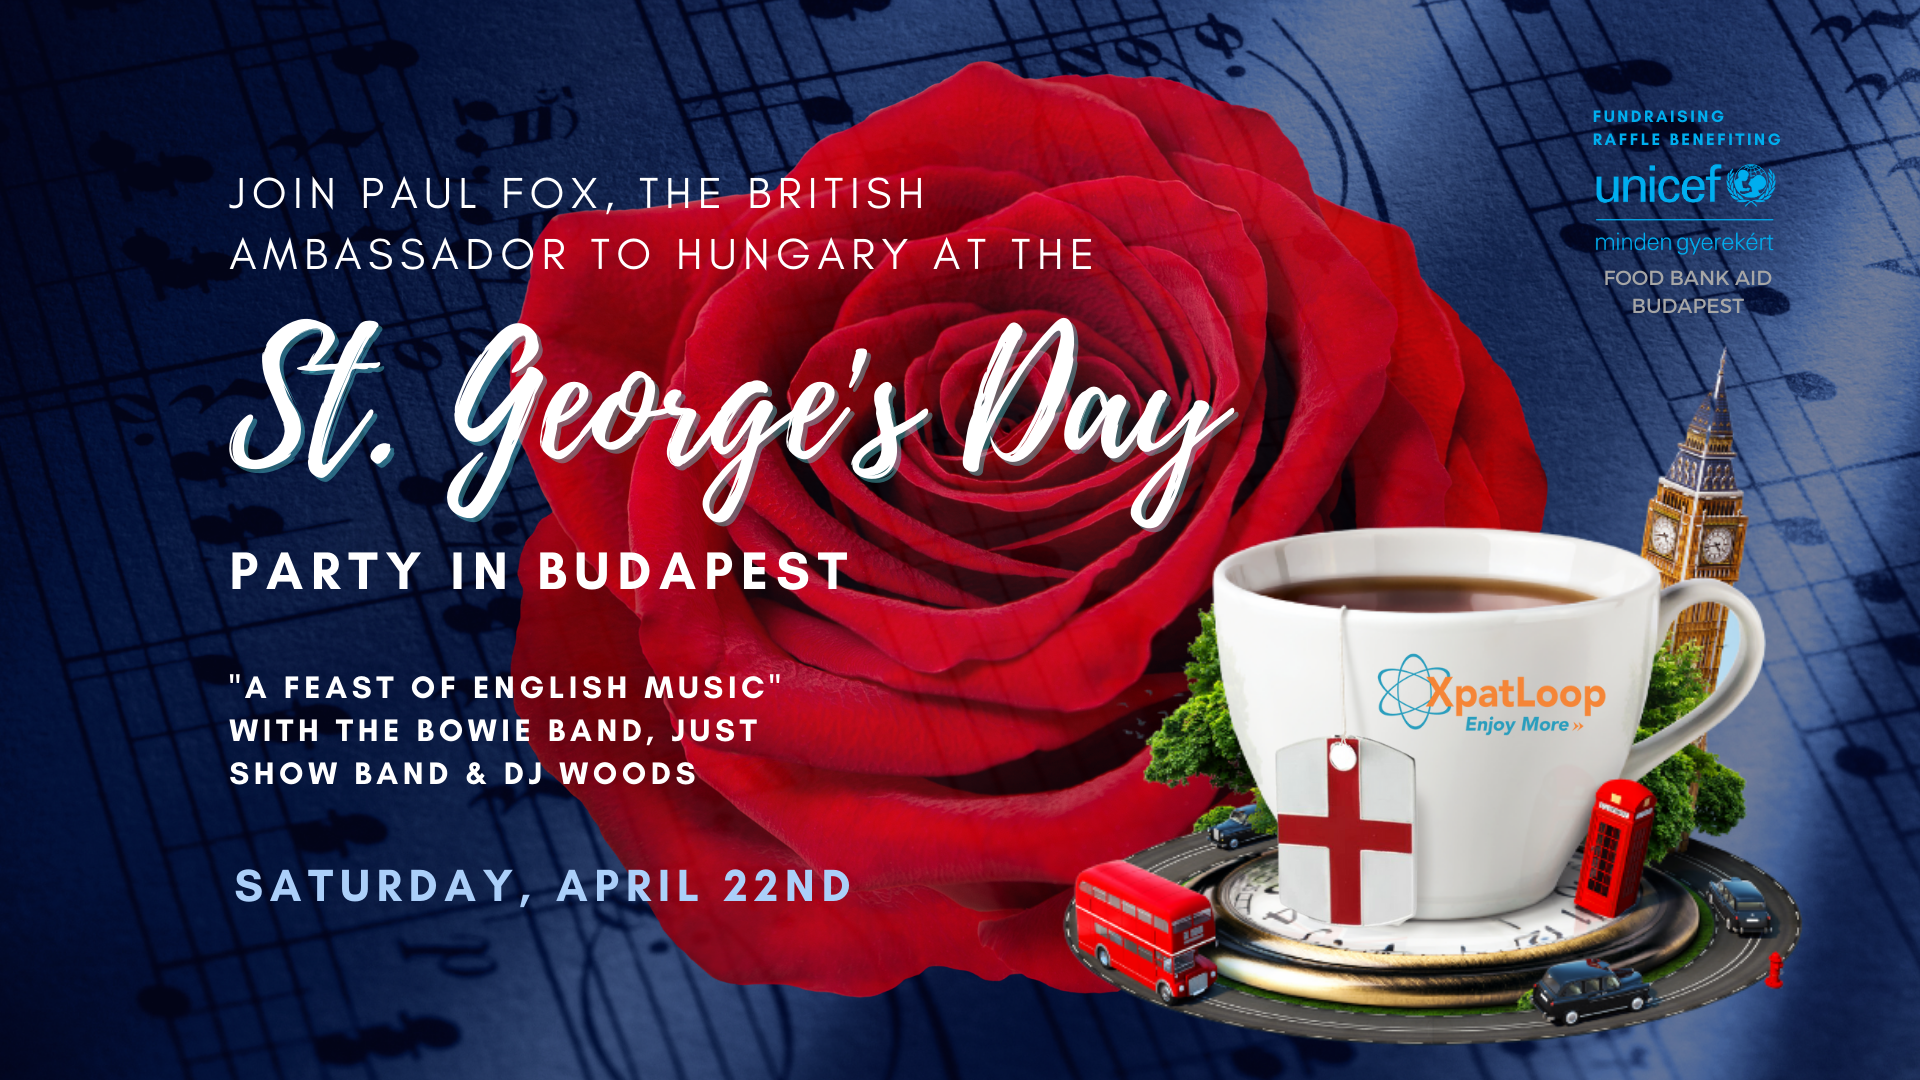 St. George’s Day Party Returns to Budapest